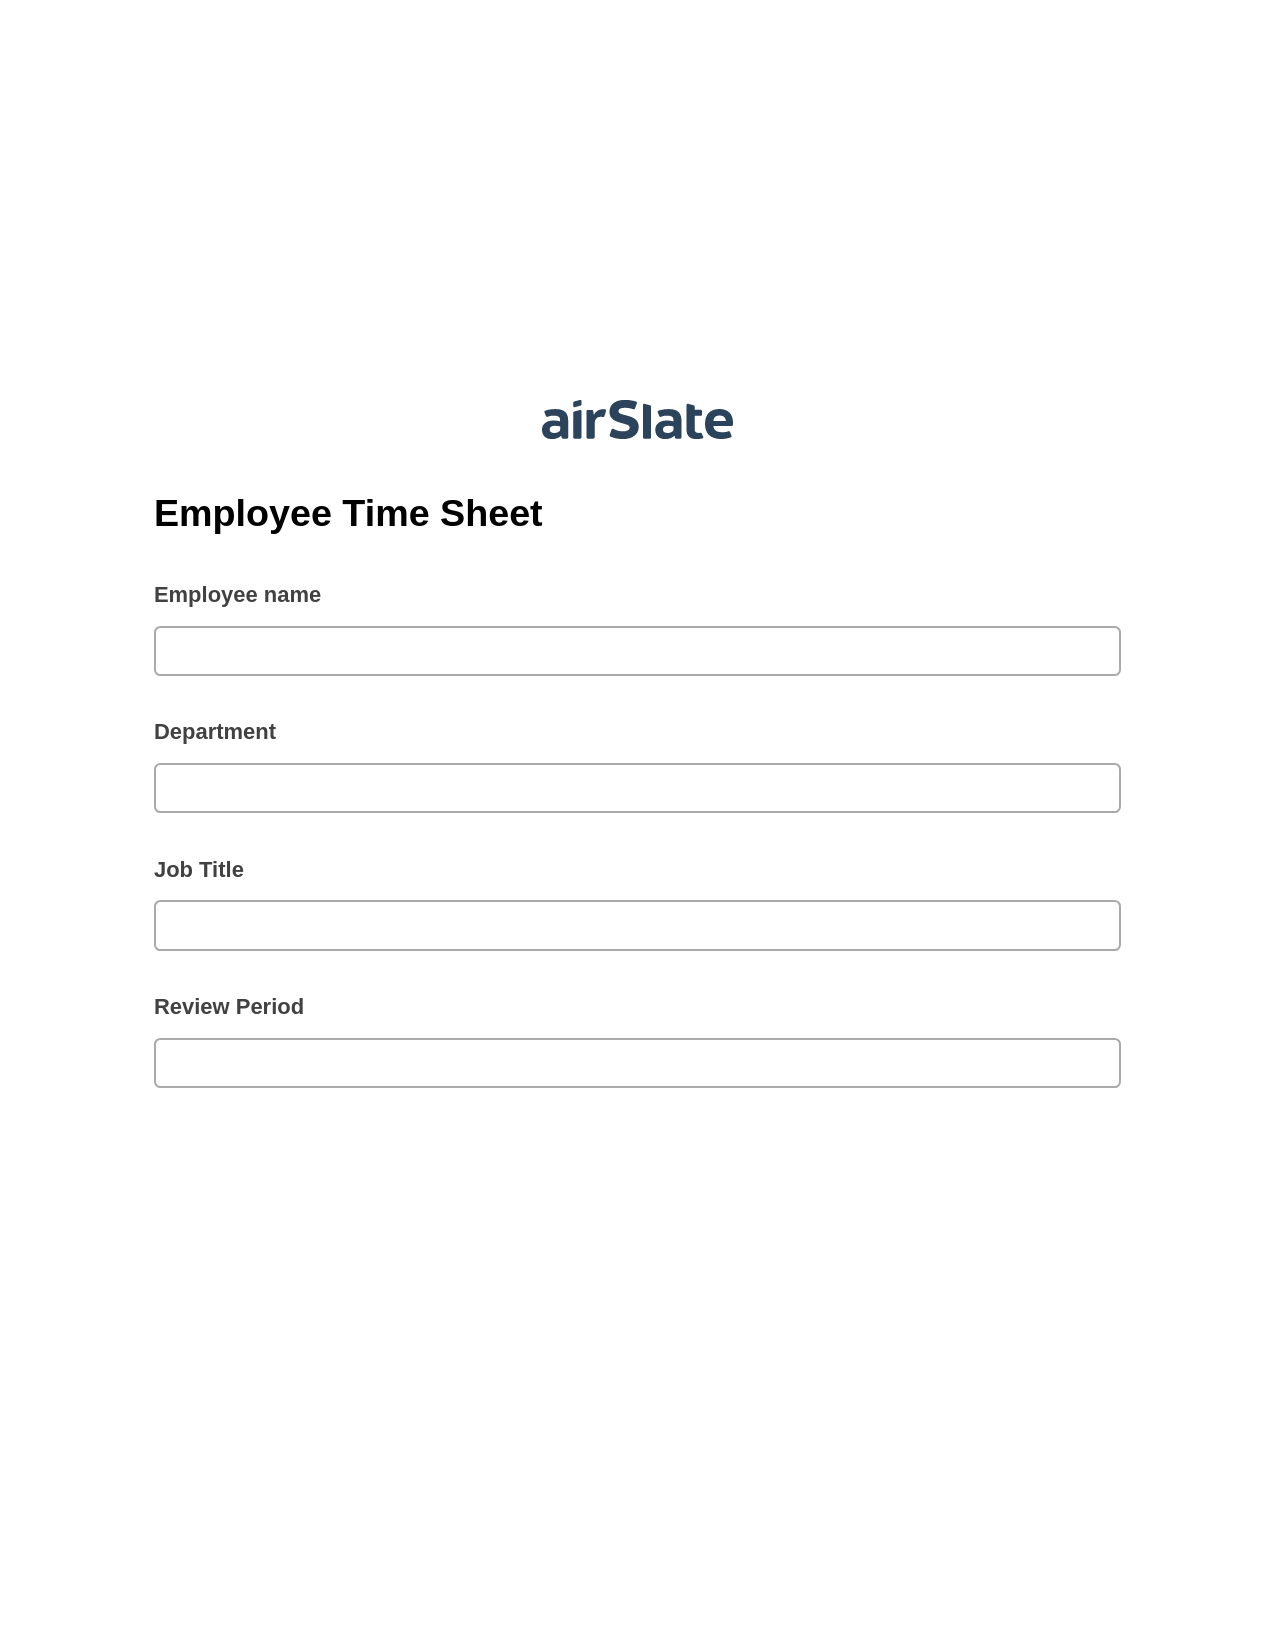 Employee Time Sheet Pre-fill from Salesforce Records Bot, Update Audit Trail Bot, Post-finish Document Bot